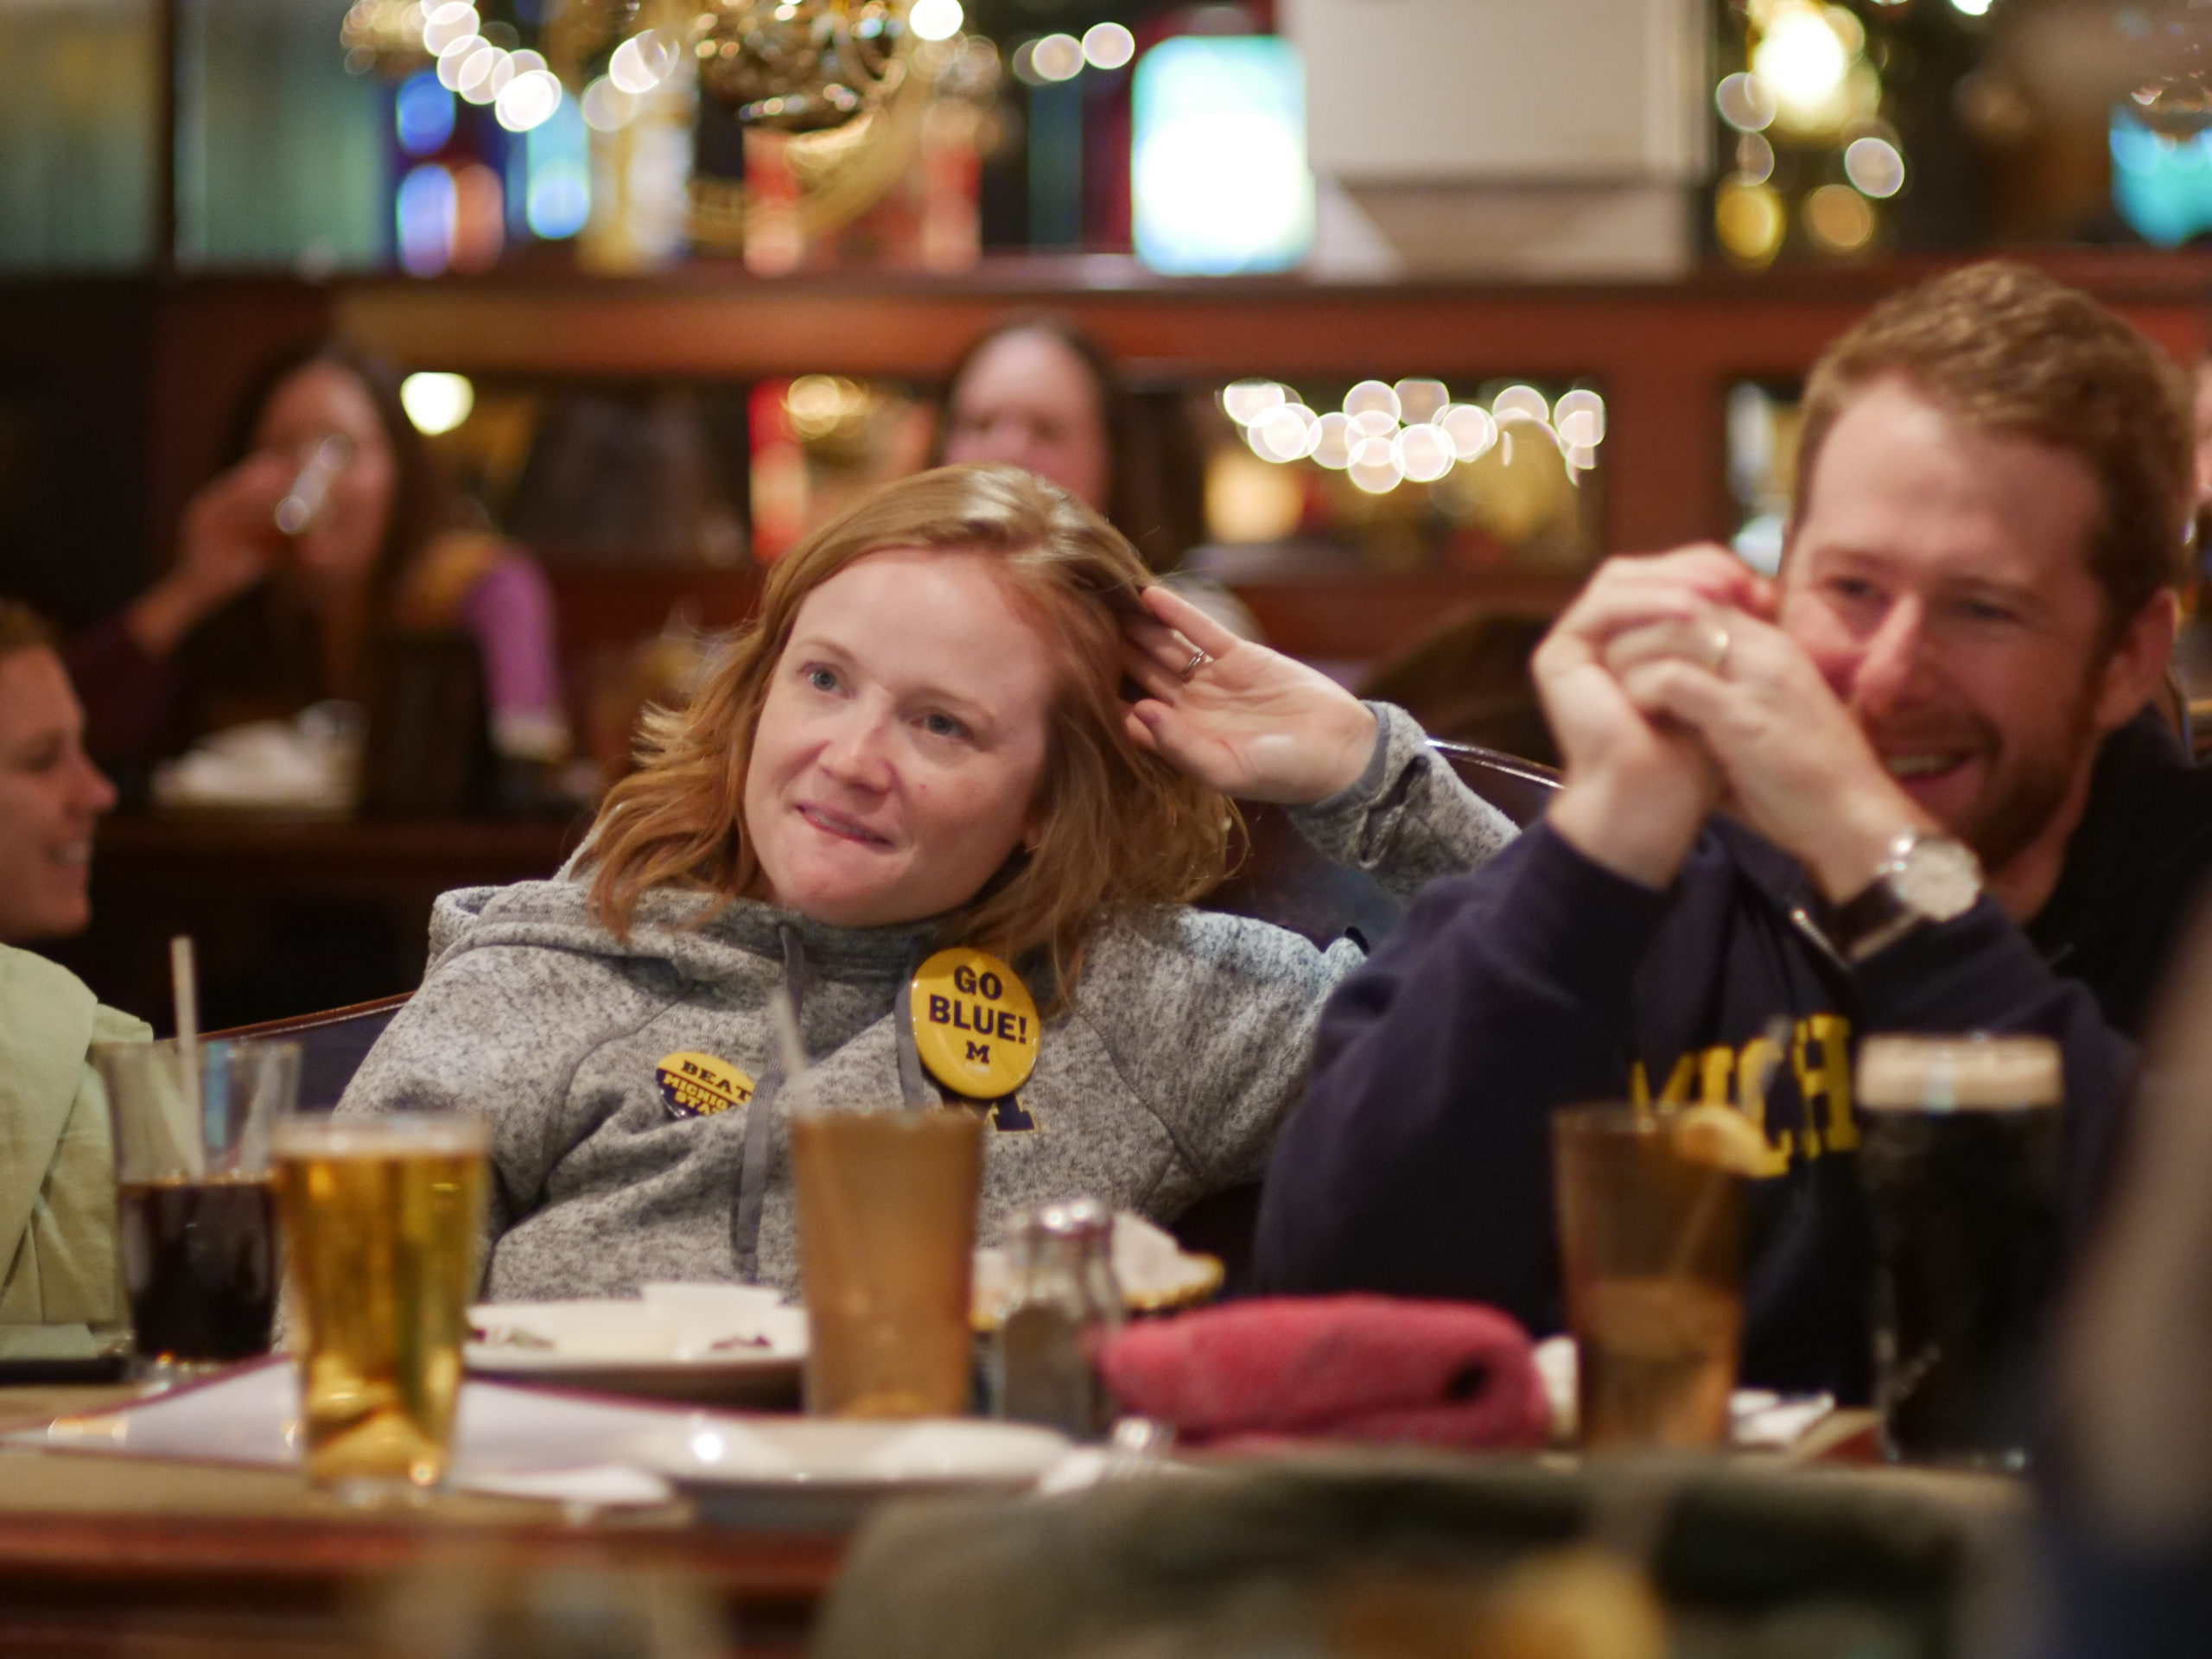 Man and woman in U-M clothing sitting at a restaurant table